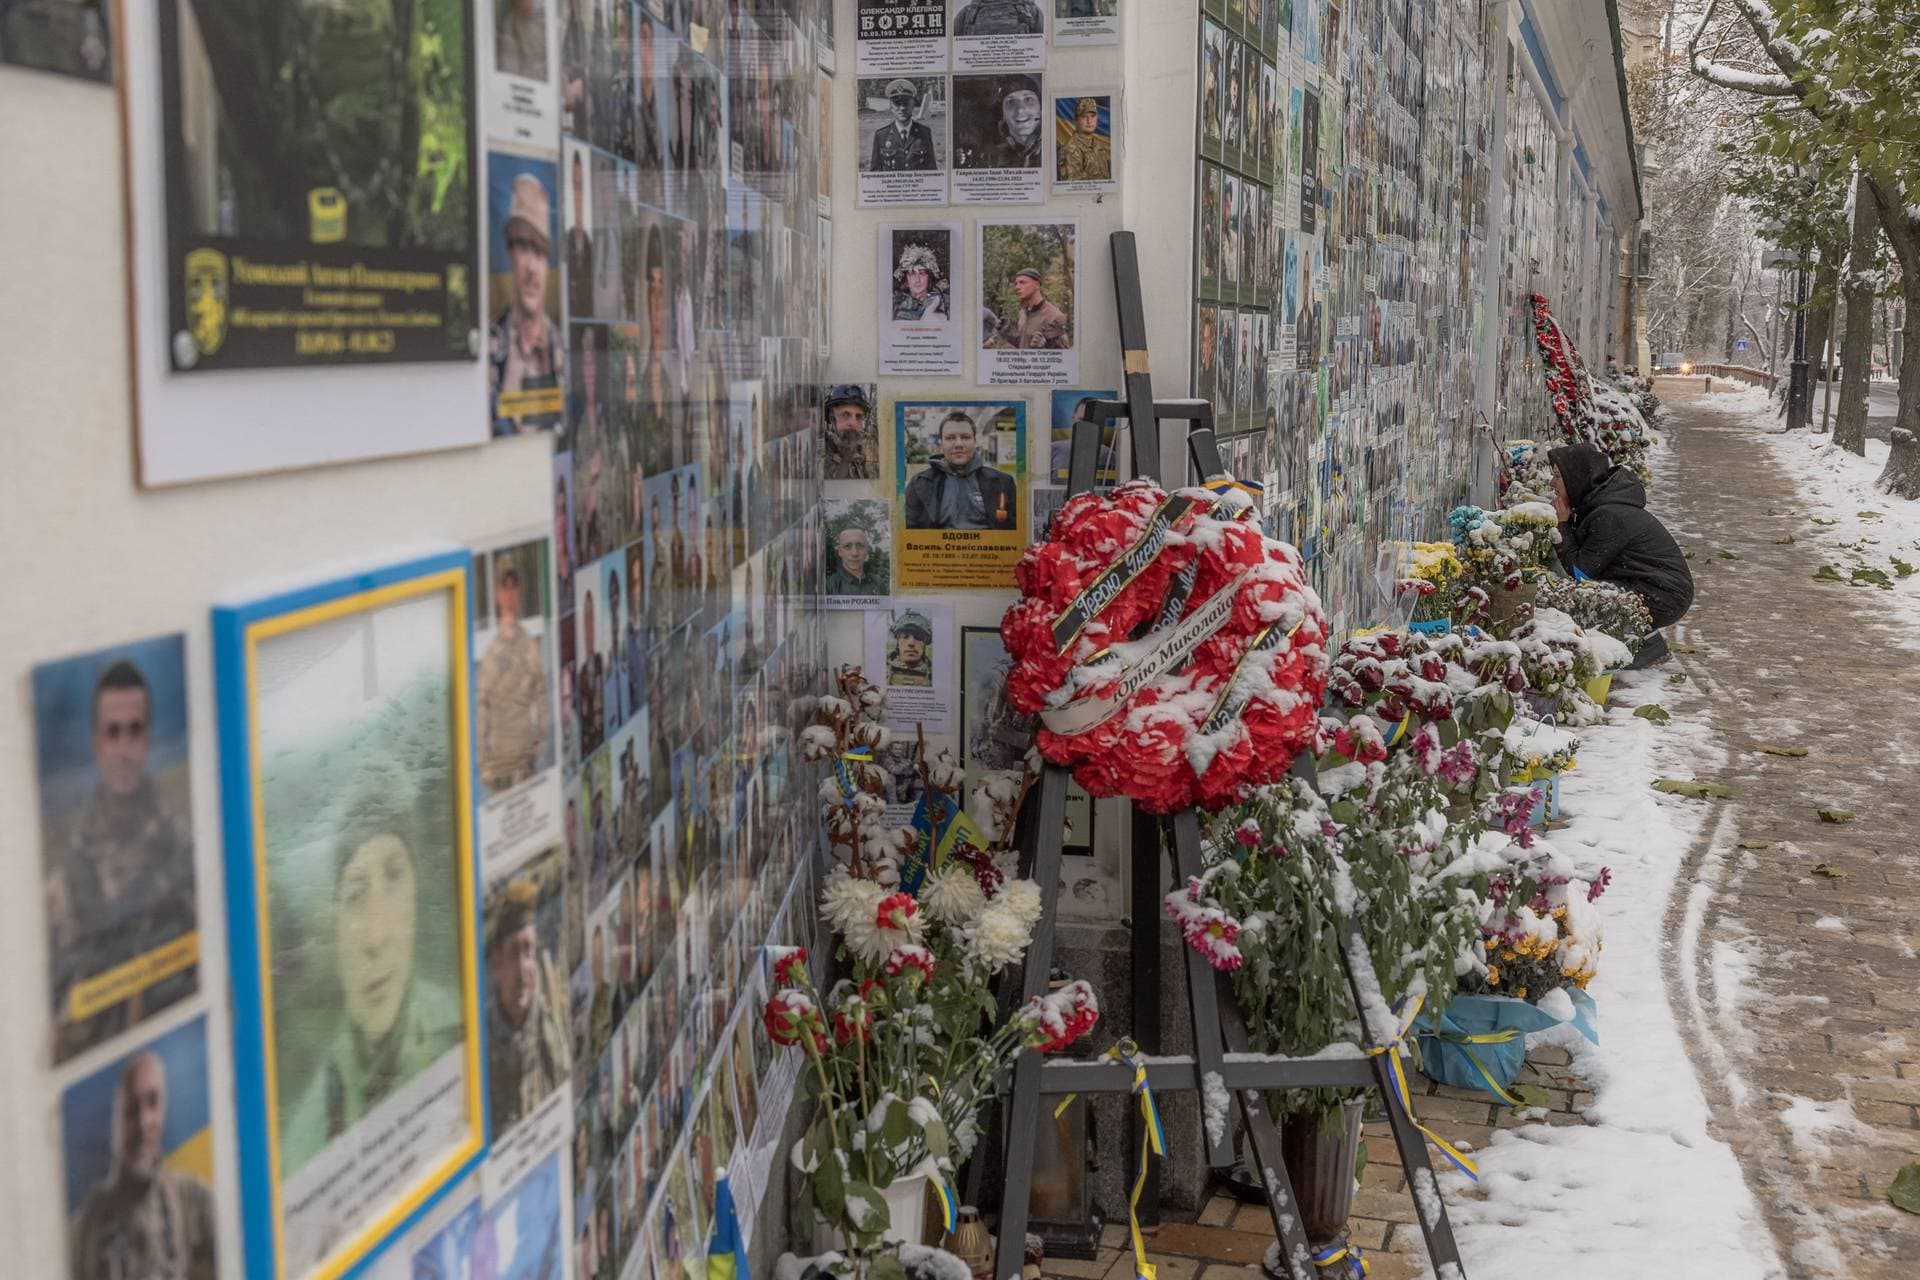 A woman sits in a street in front of the memorial wall of fallen defenders of Ukraine in Kyiv